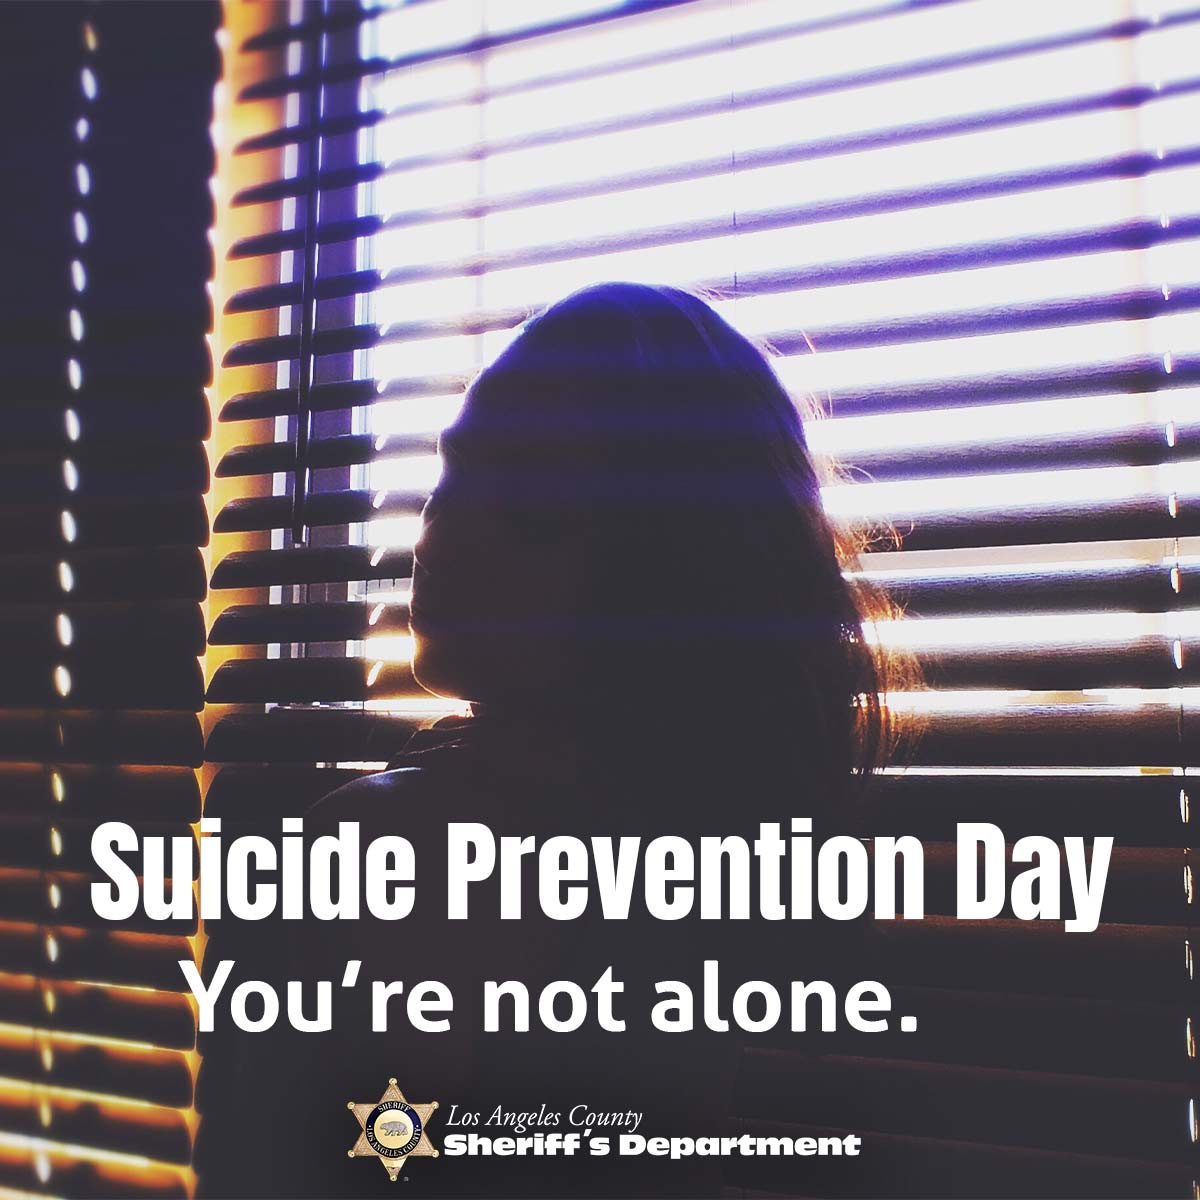 Suicide Prevention Day; You're not alone. Text over an image of a person with long hair sitting in front of partially open blinds. the person is back light so you only see a silhouette.